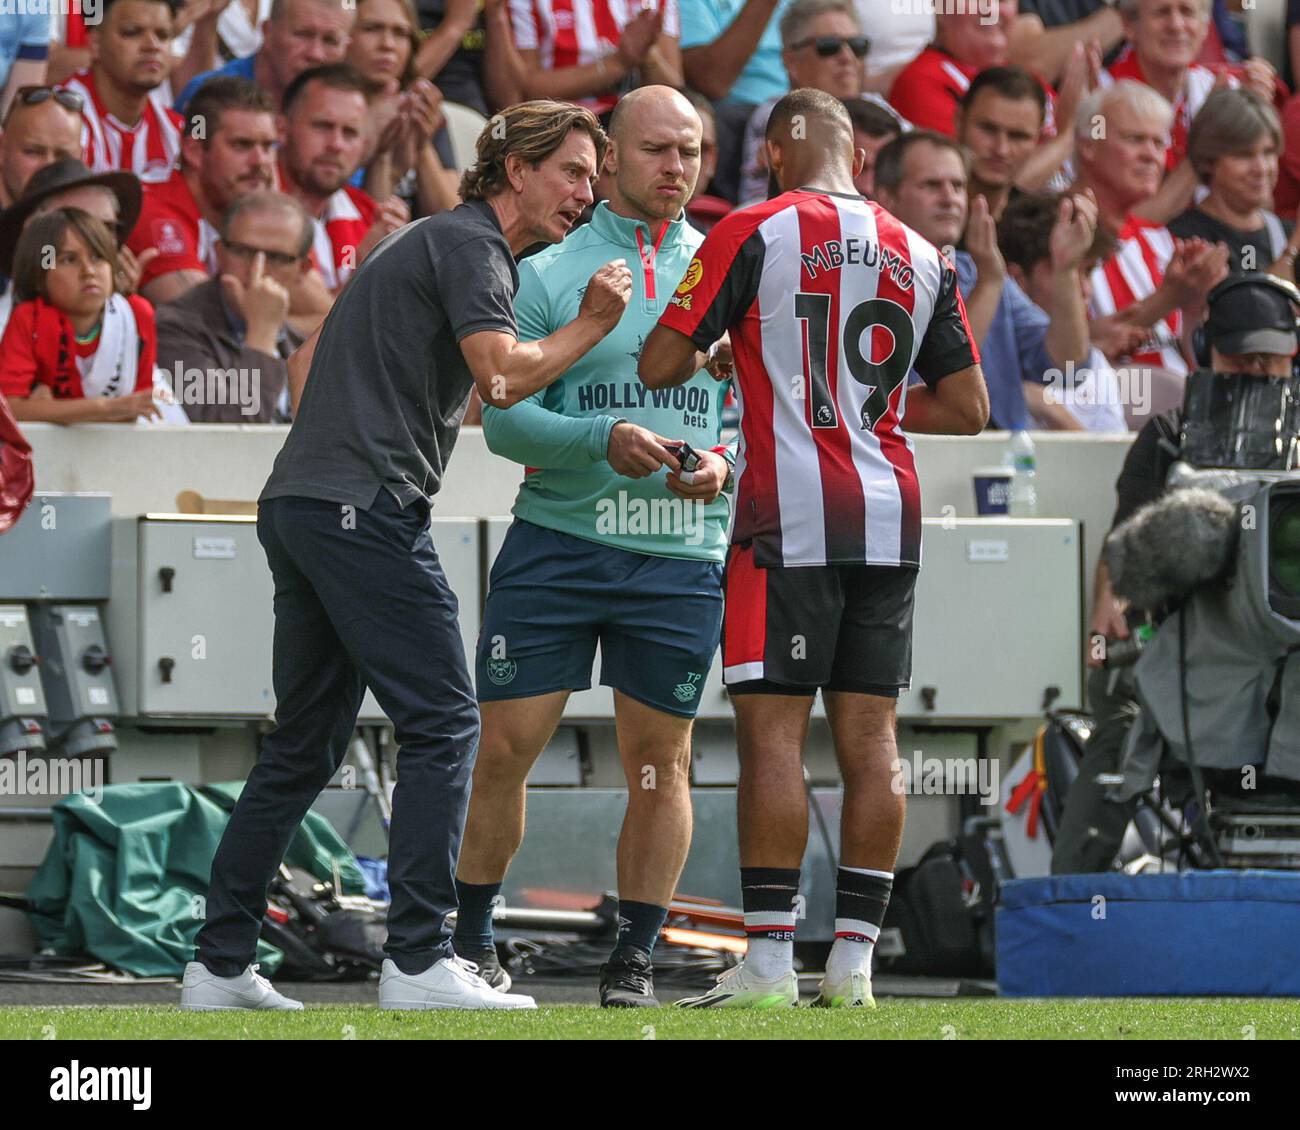 Thomas Frankhead coach of Brentford gives instructions to Bryan Mbeumo of Brentford during a break in play during the Premier League match Brentford vs Tottenham Hotspur at Brentford Community Stadium, London, United Kingdom, 13th August 2023  (Photo by Mark Cosgrove/News Images) Stock Photo